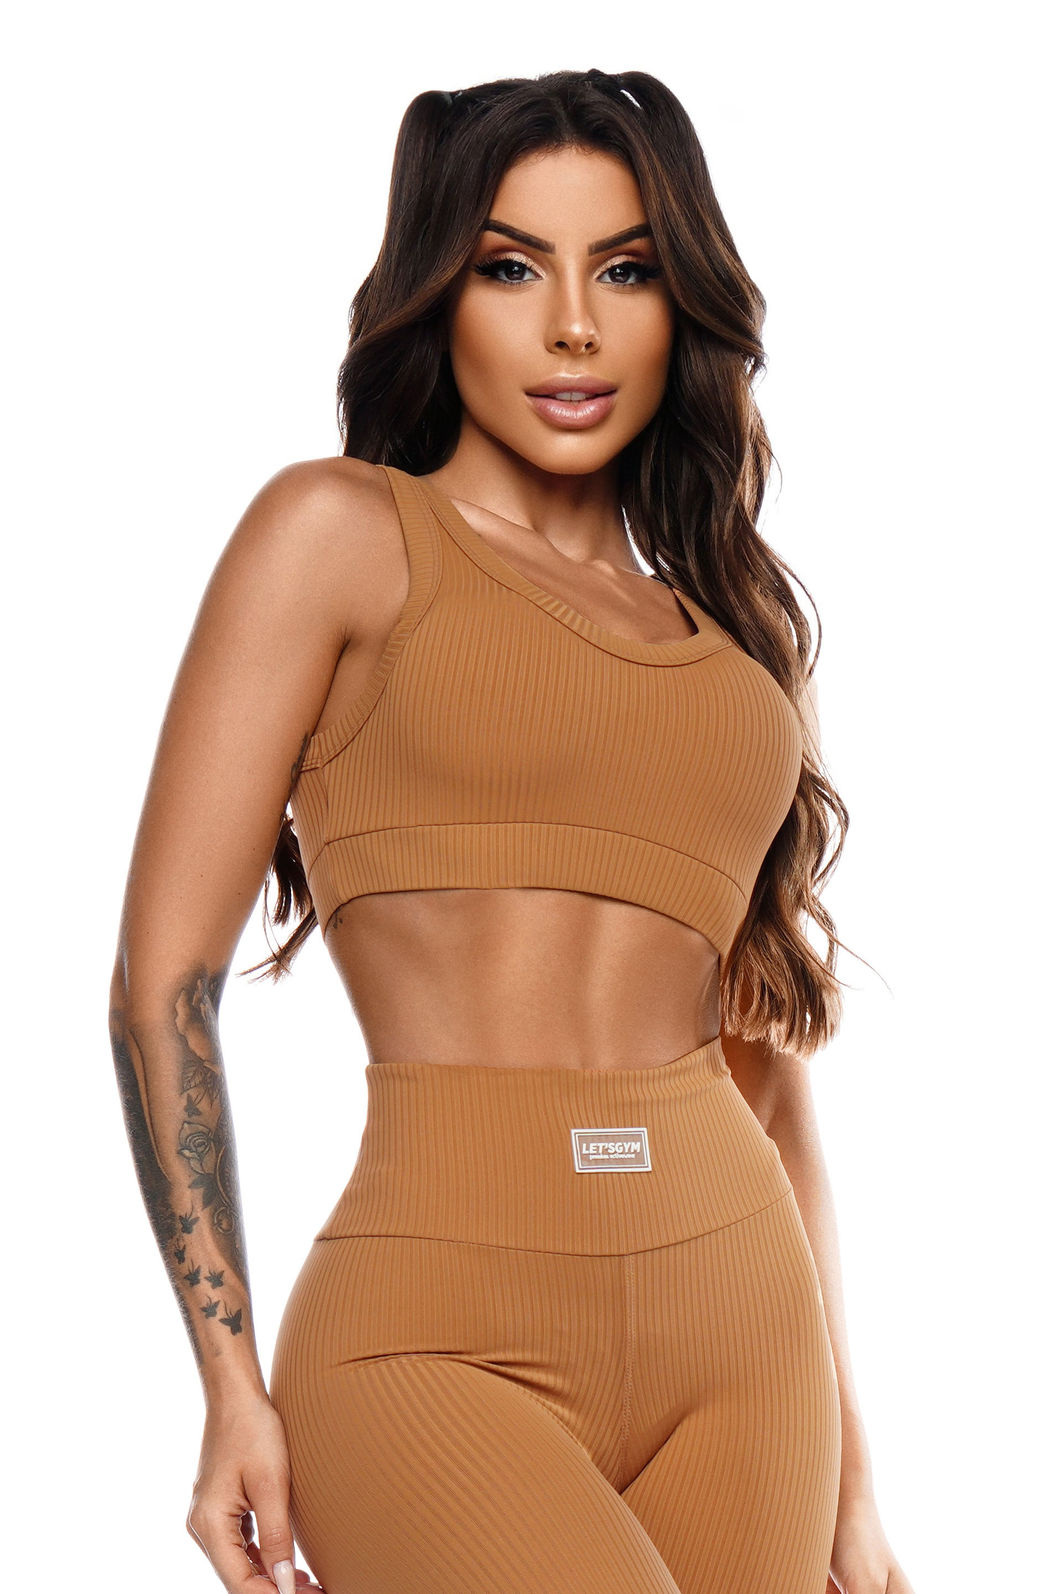 OQQ Womens 2 Piece Crop Top Ribbed Seamless Workout Exercise Yoga Basic  Long Sleeve Crop Tops